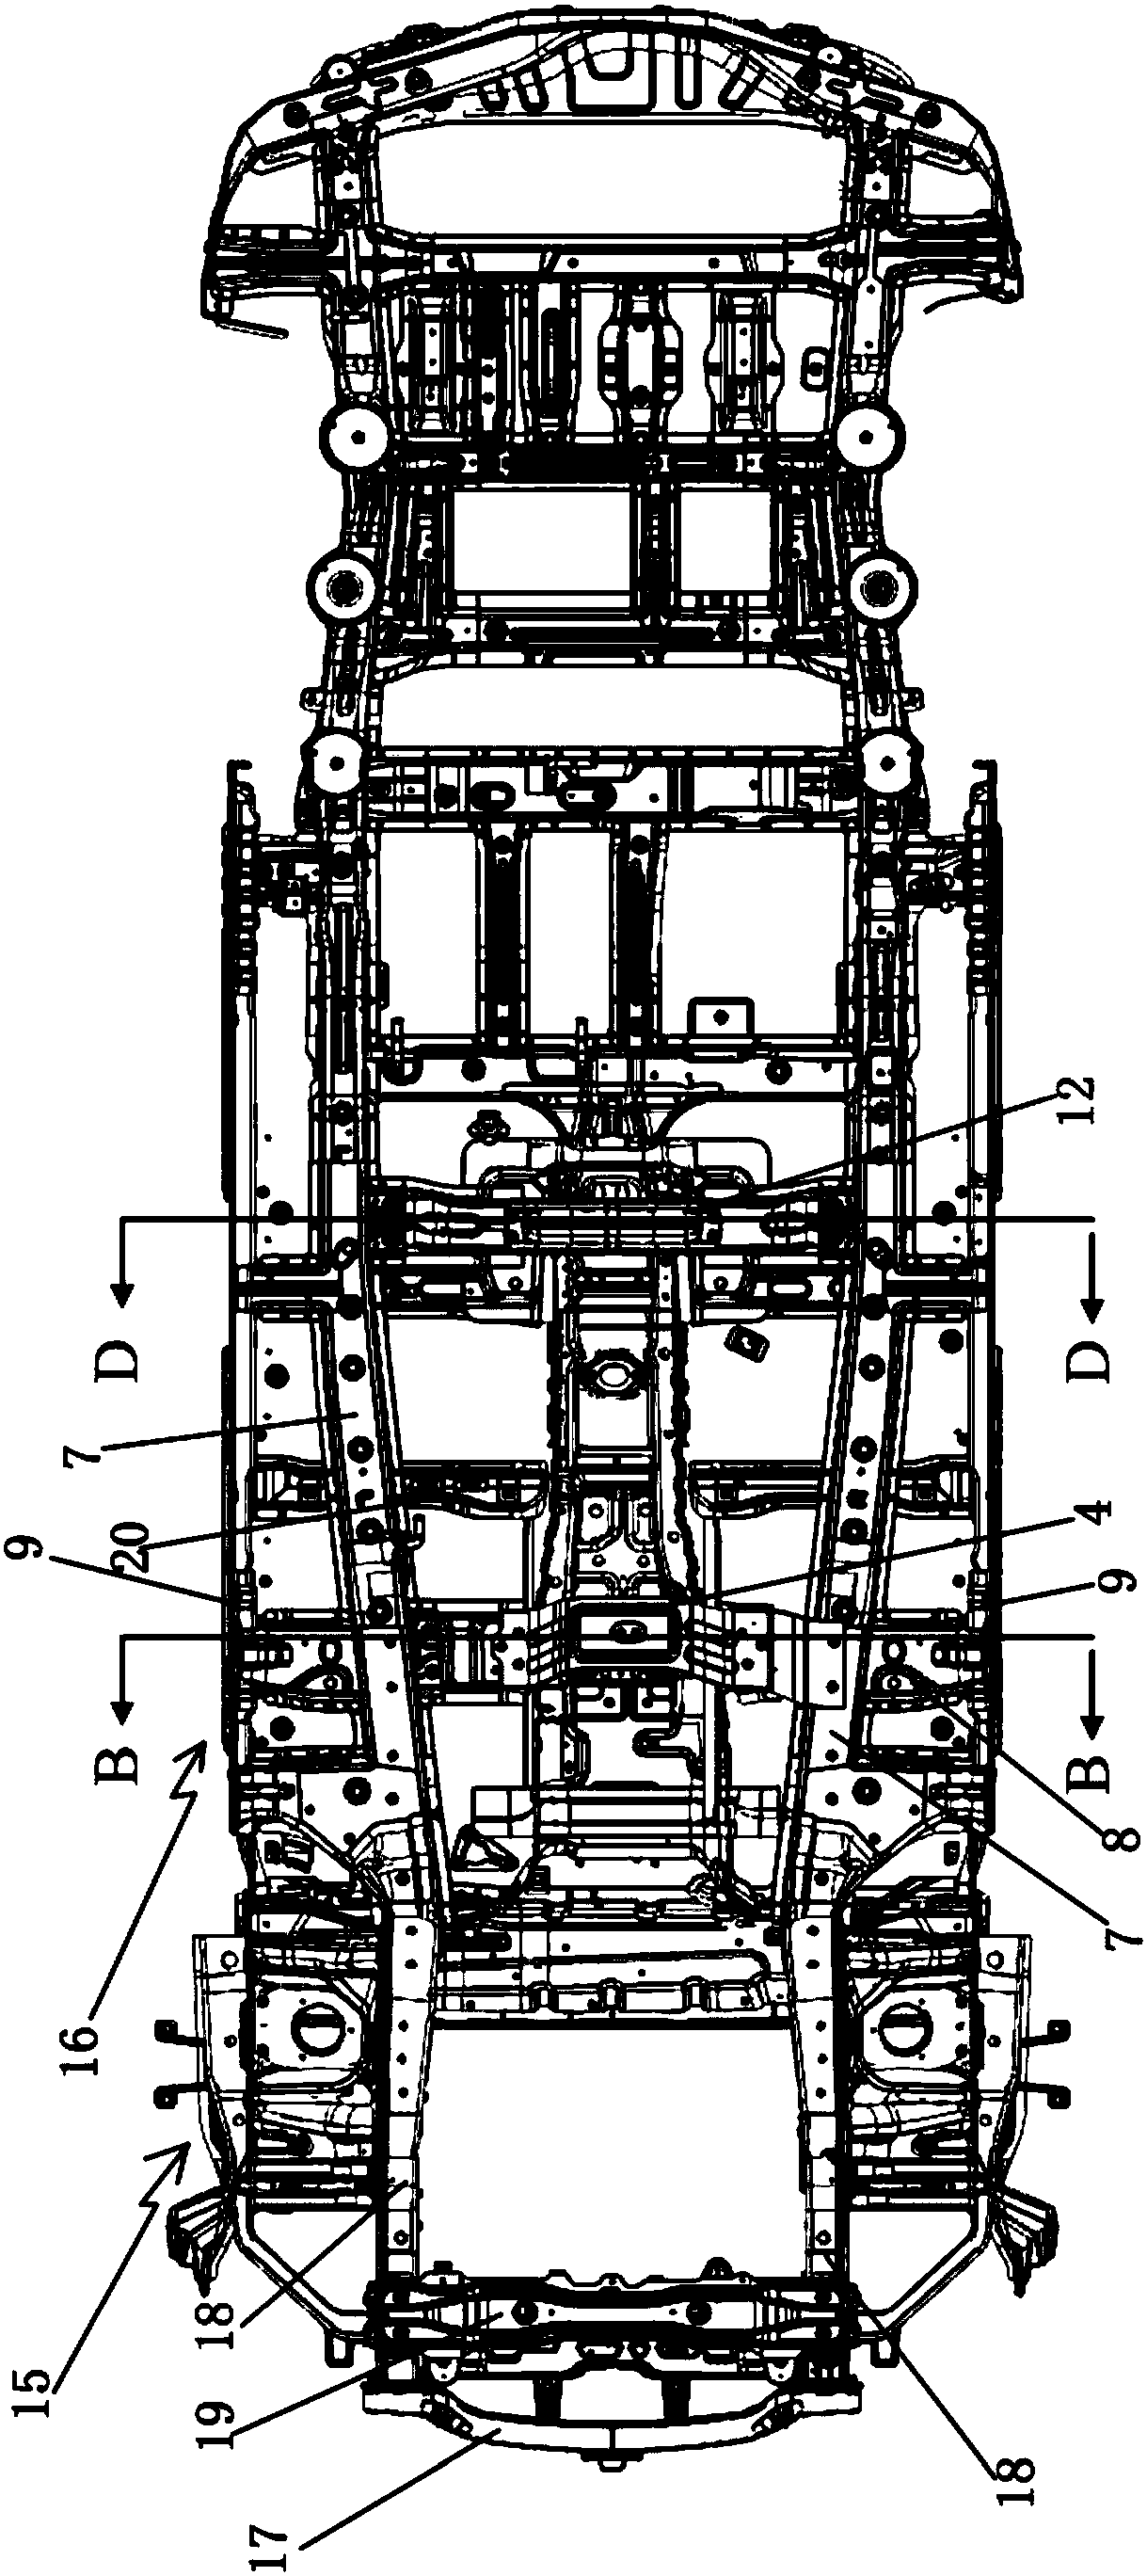 Front frame assembly of vehicle body chassis